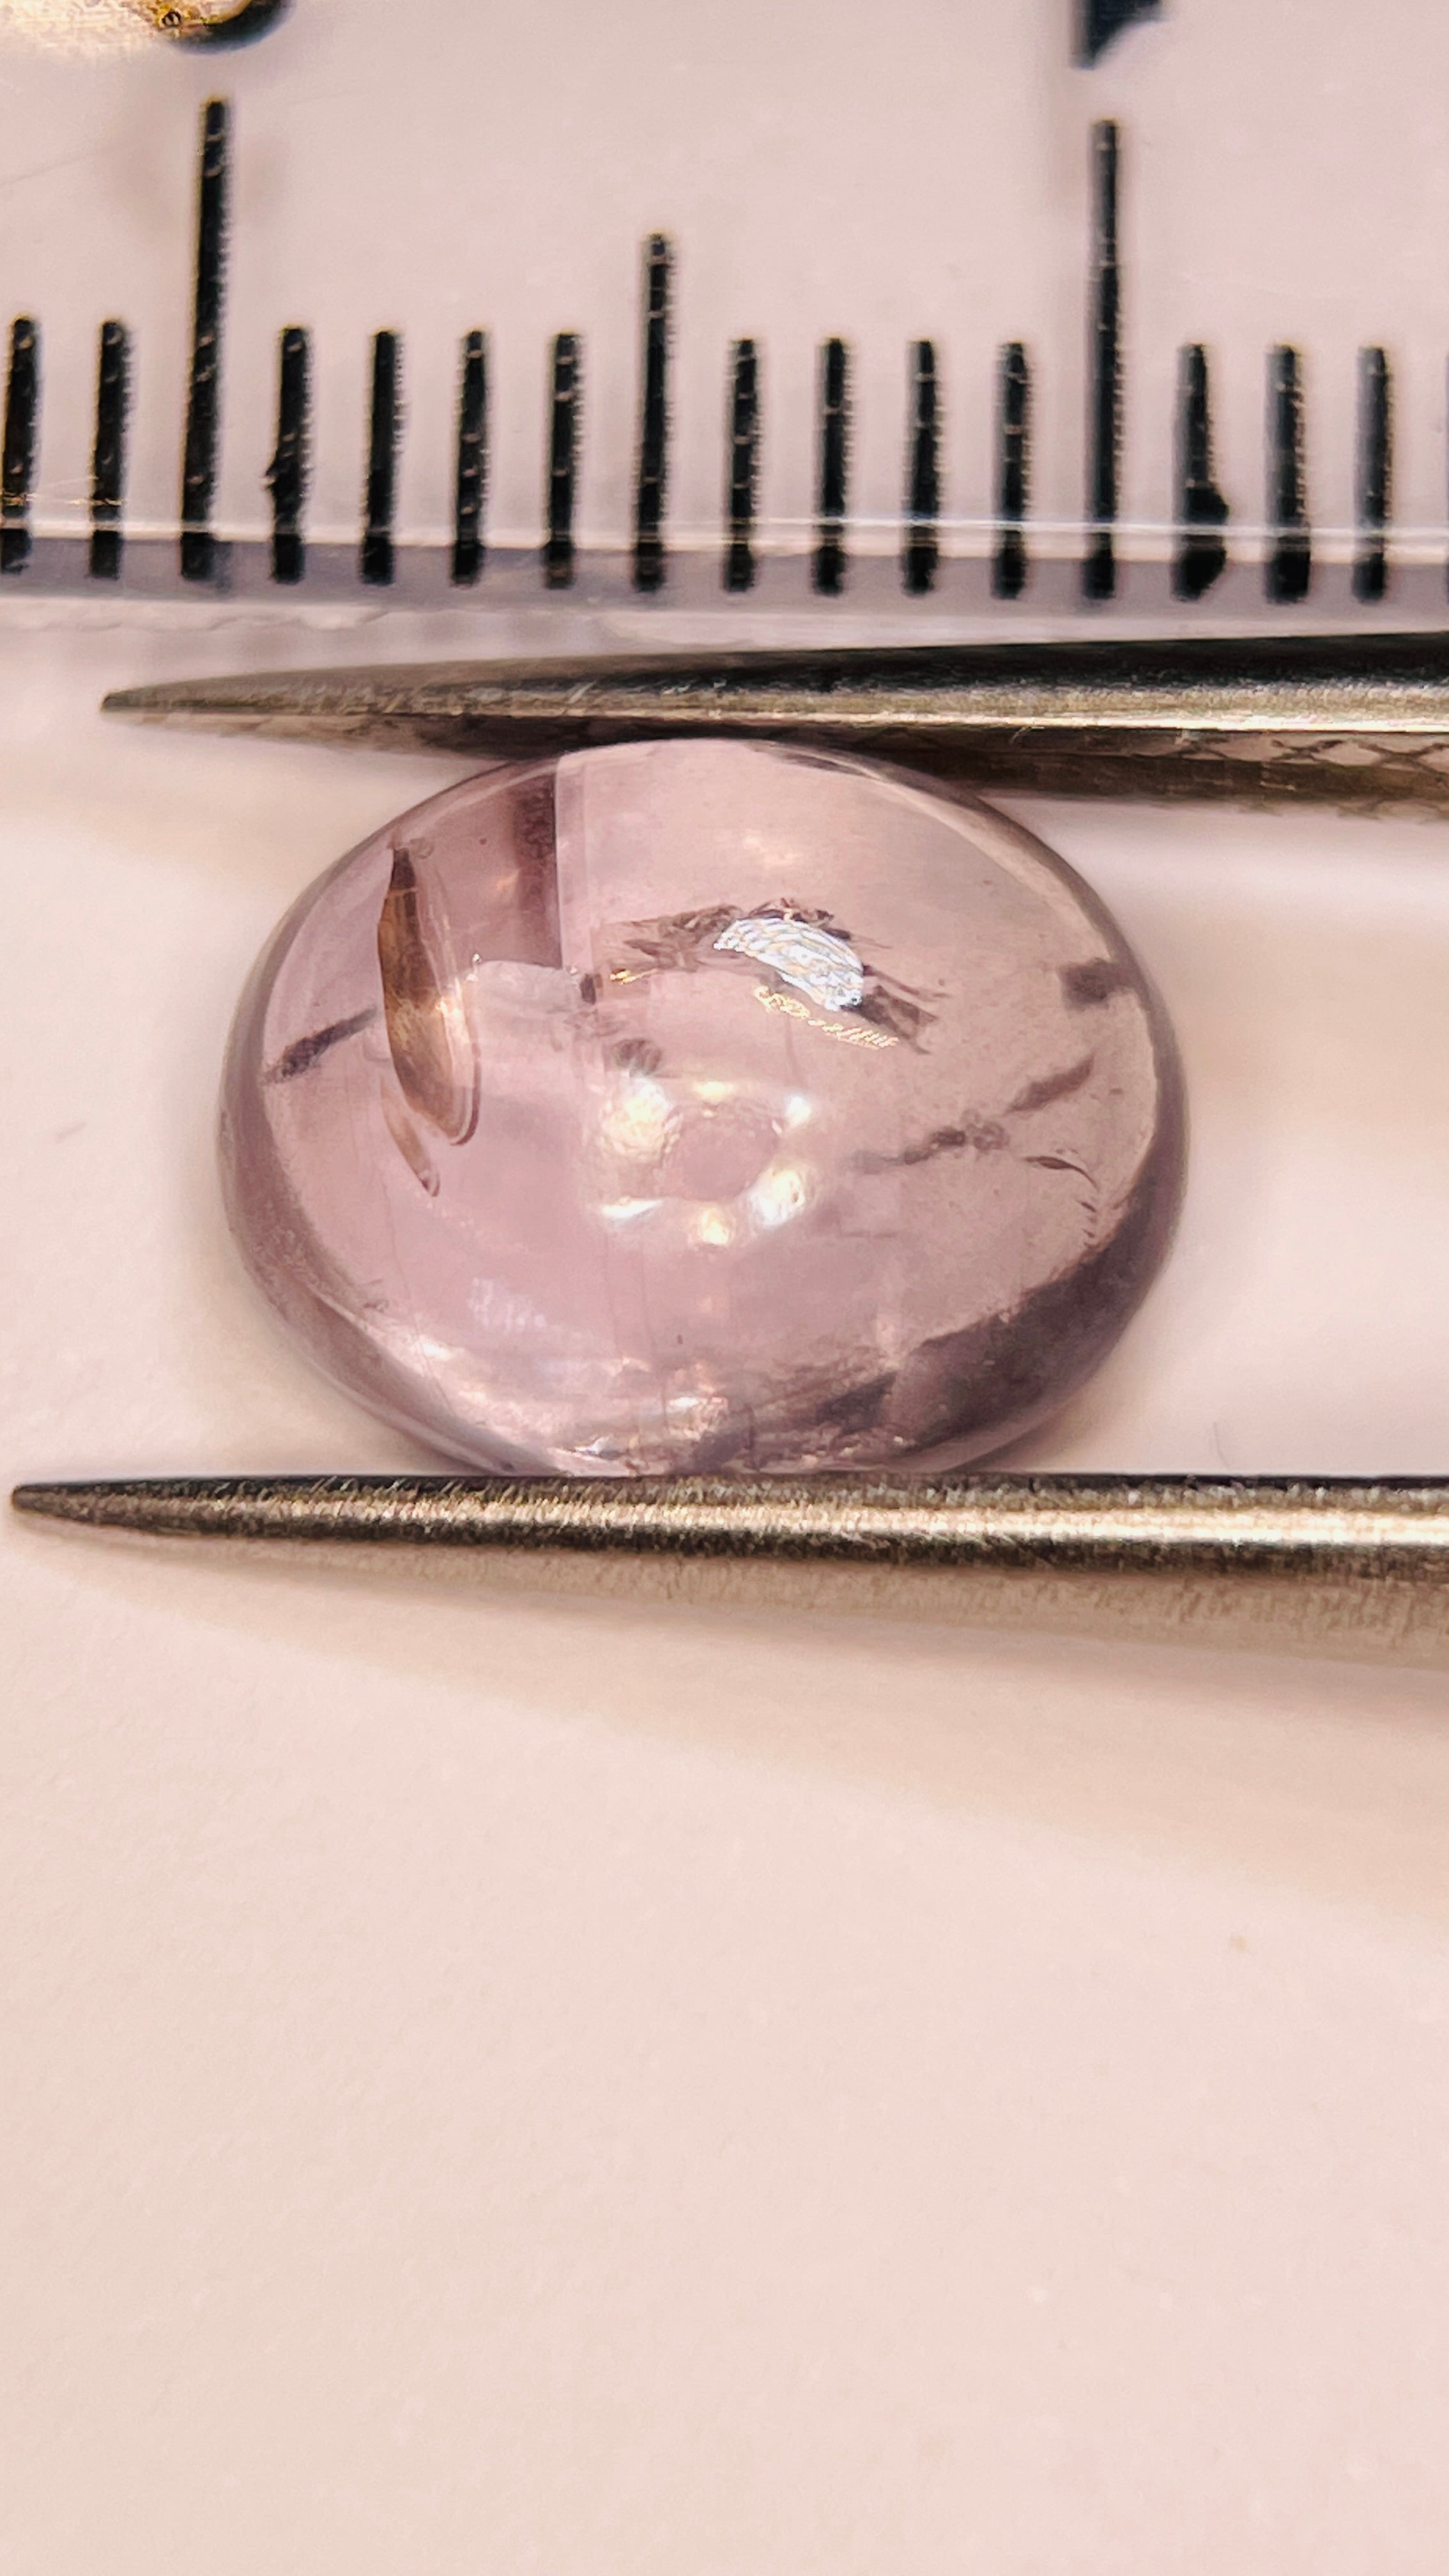 5.20Ct Colour Change / Shift Sapphire Cabochon Umba Valley Tanzania. Untreated Unheated.